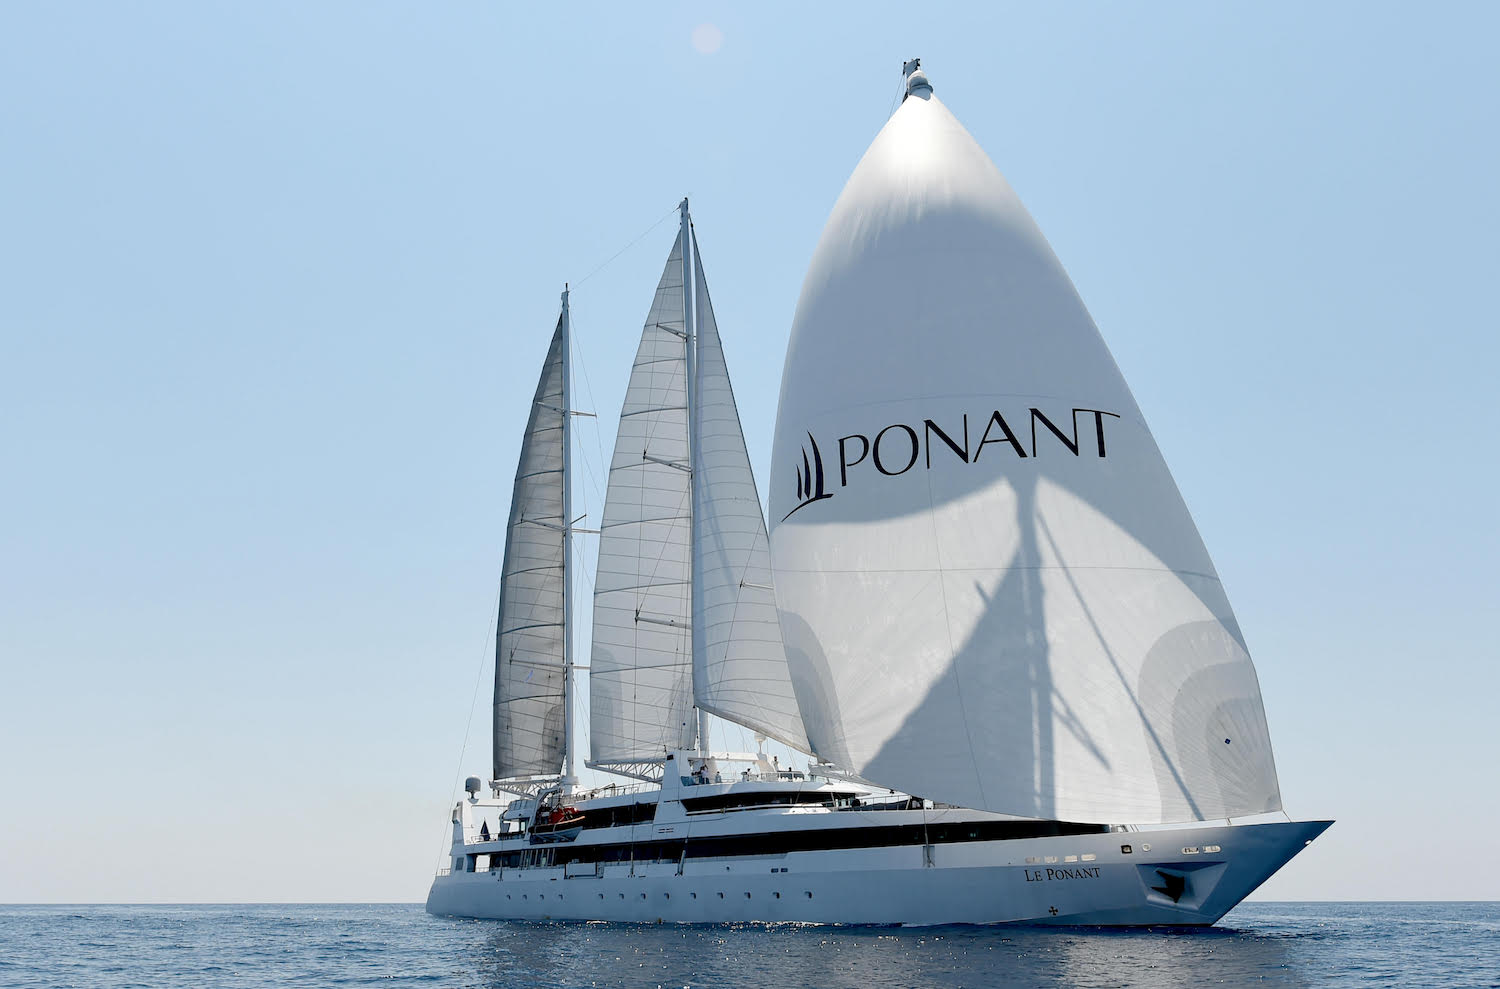 Ponant to sail three-masted schooner in The Kimberley with Paspaley partnership